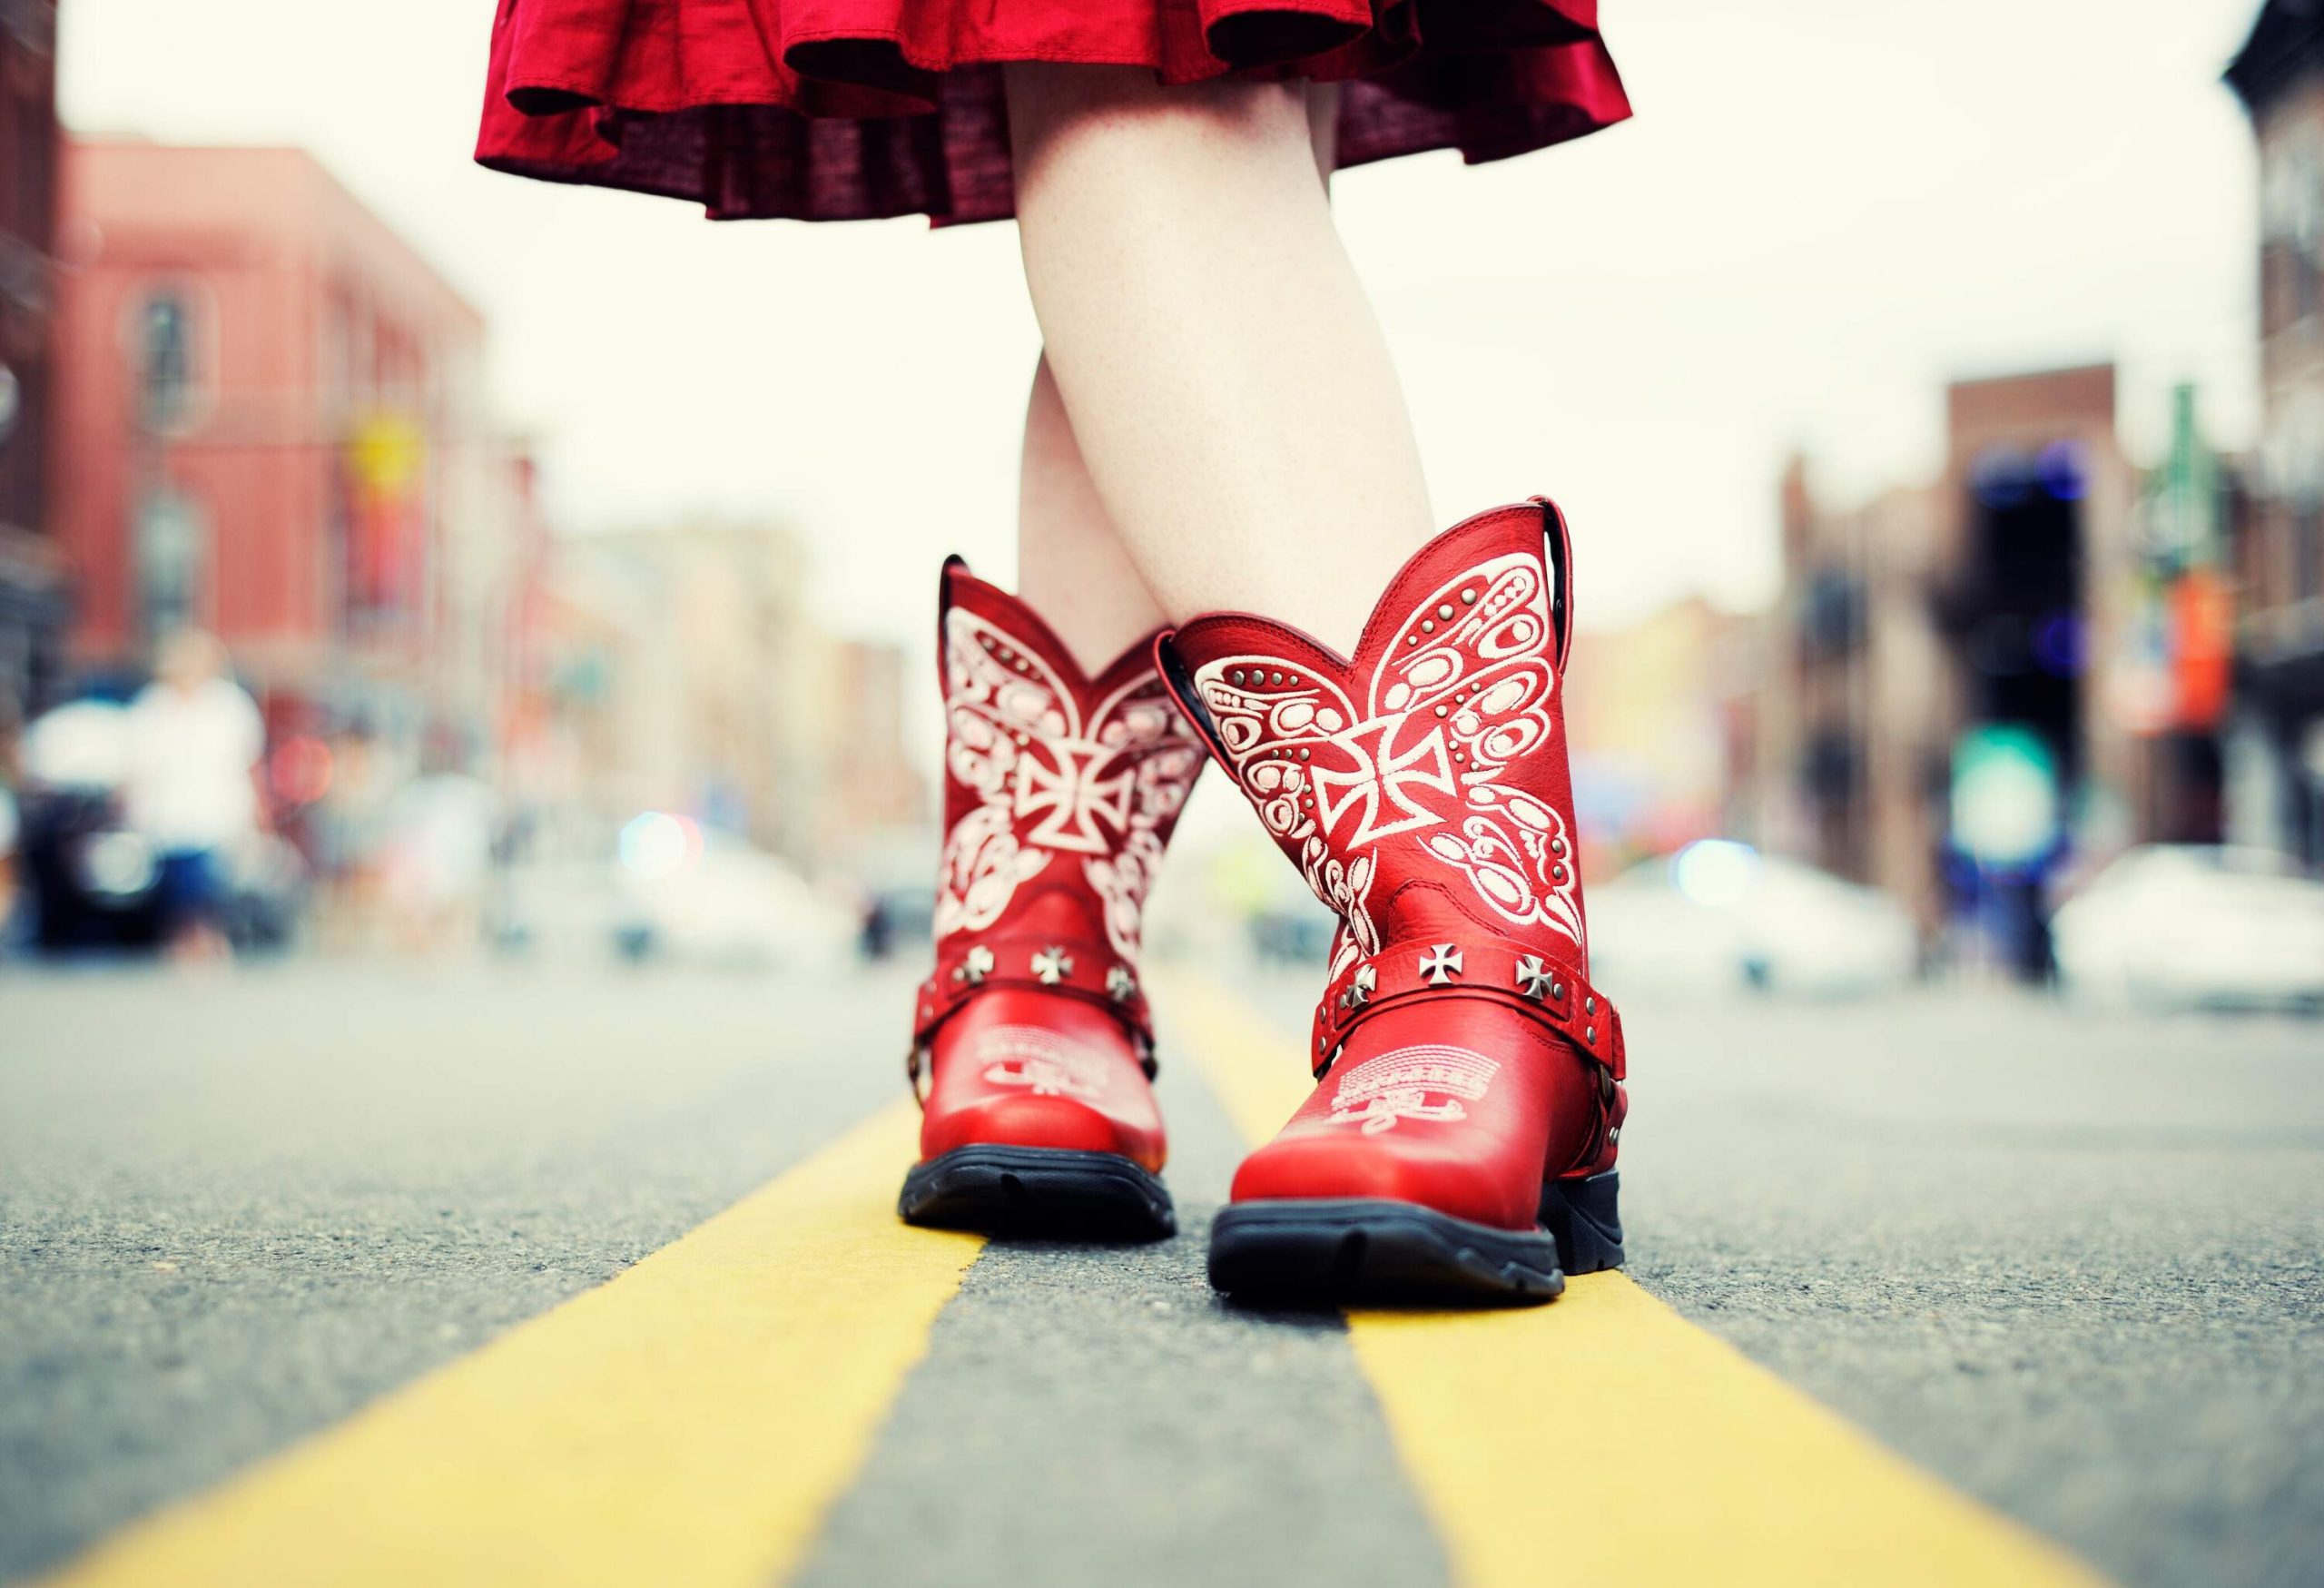 A pair of legs wearing red printed boots standing on two yellow lines in the middle of the road.